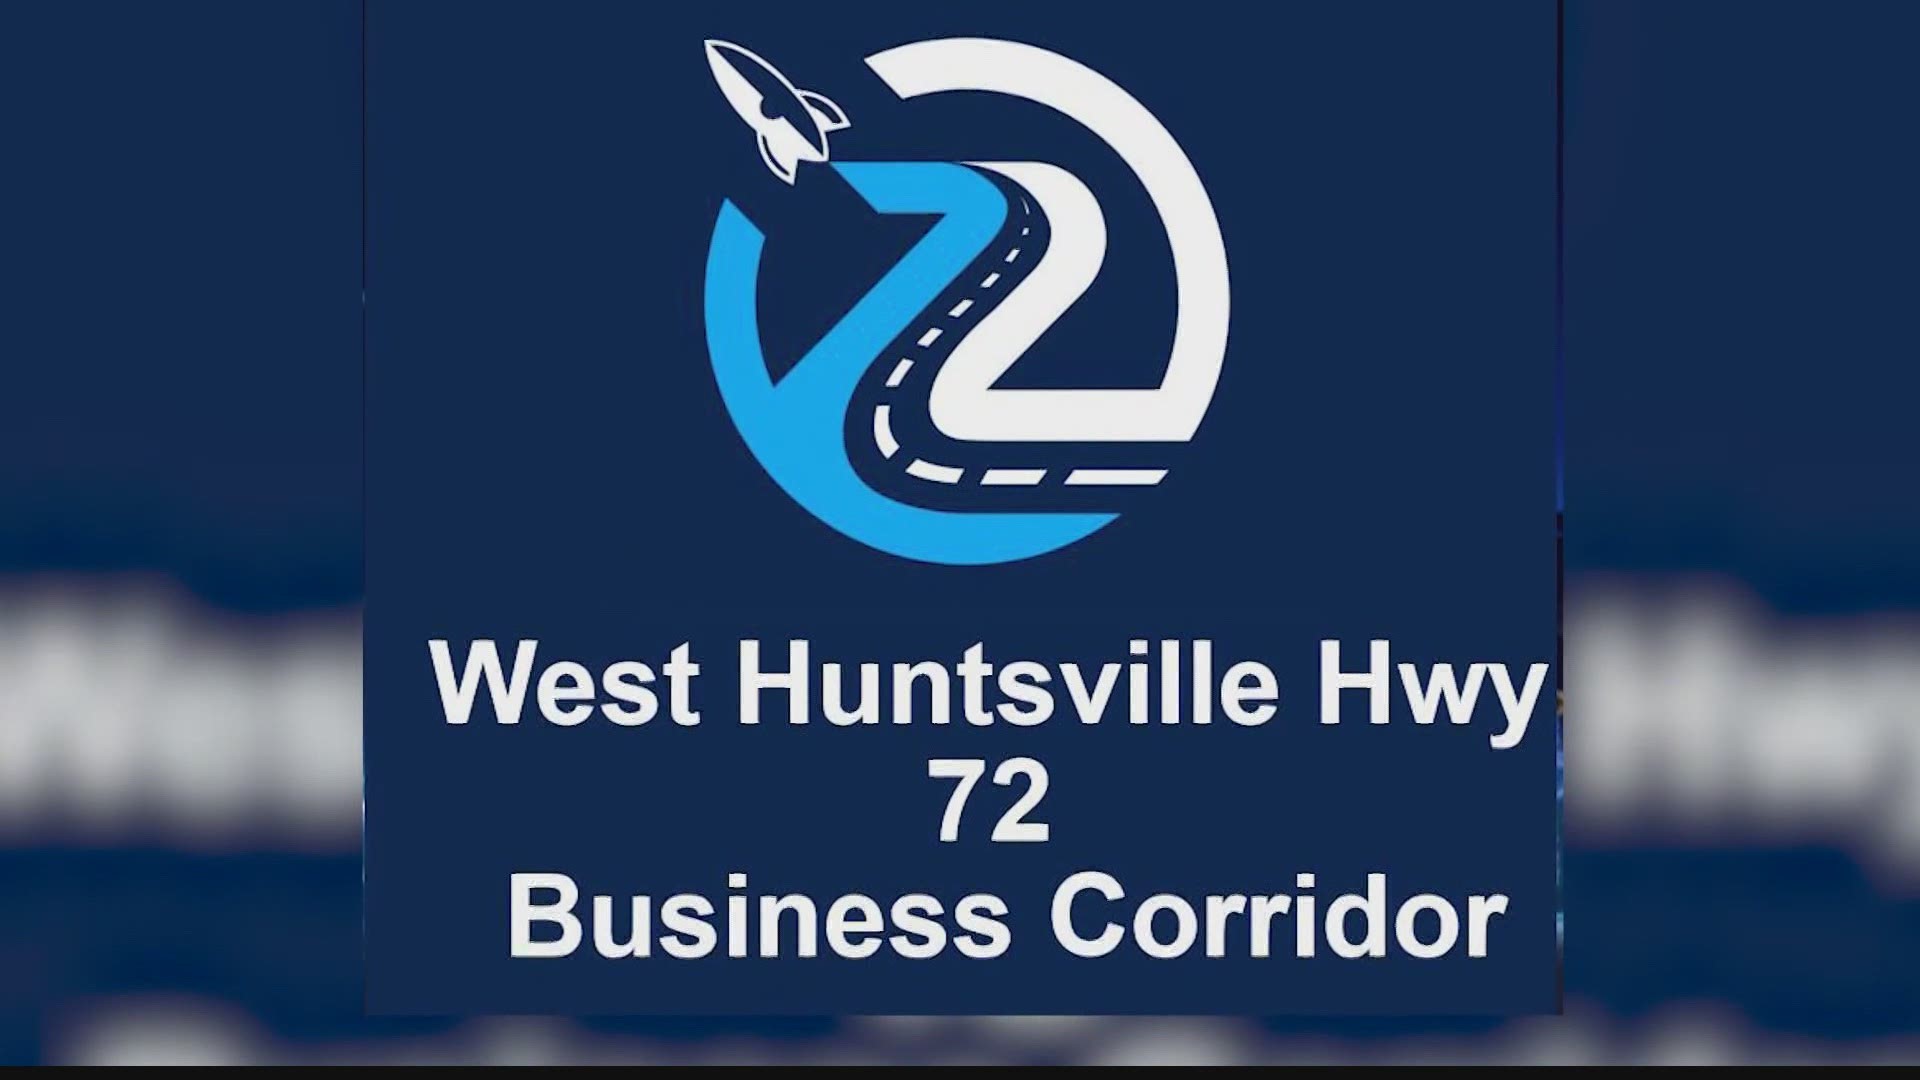 Leaders are forming the "West Huntsville Highway 72 Business Corridor Association" to help businesses generate more growth.